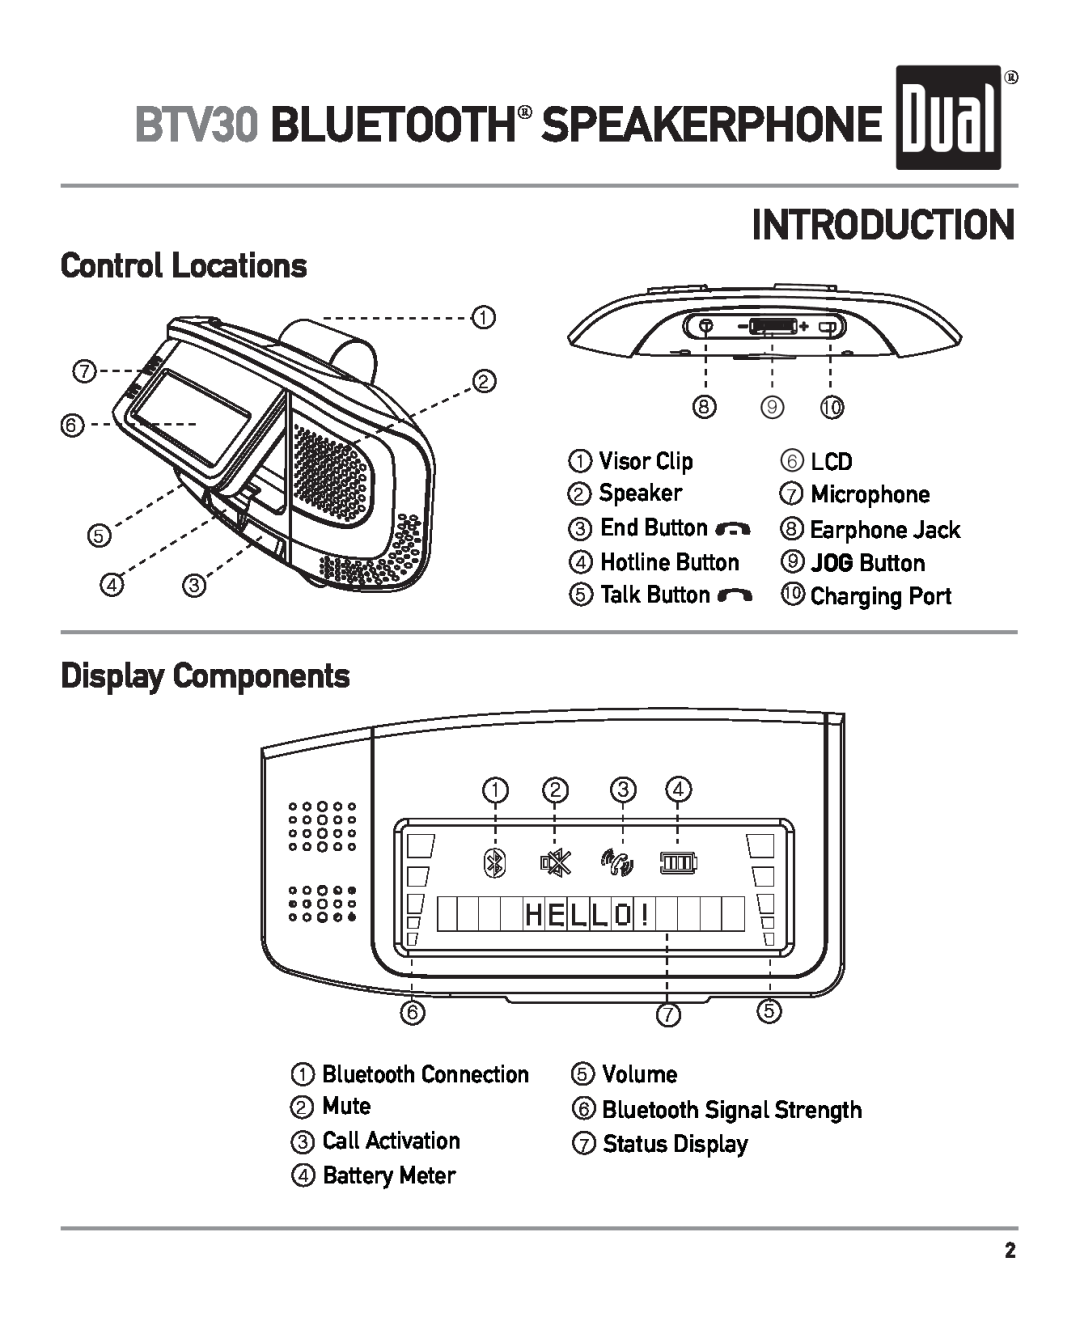 Dual owner manual BTV30 BLUETOOTH SPEAKERPHONE, Control Locations, Display Components, Introduction 